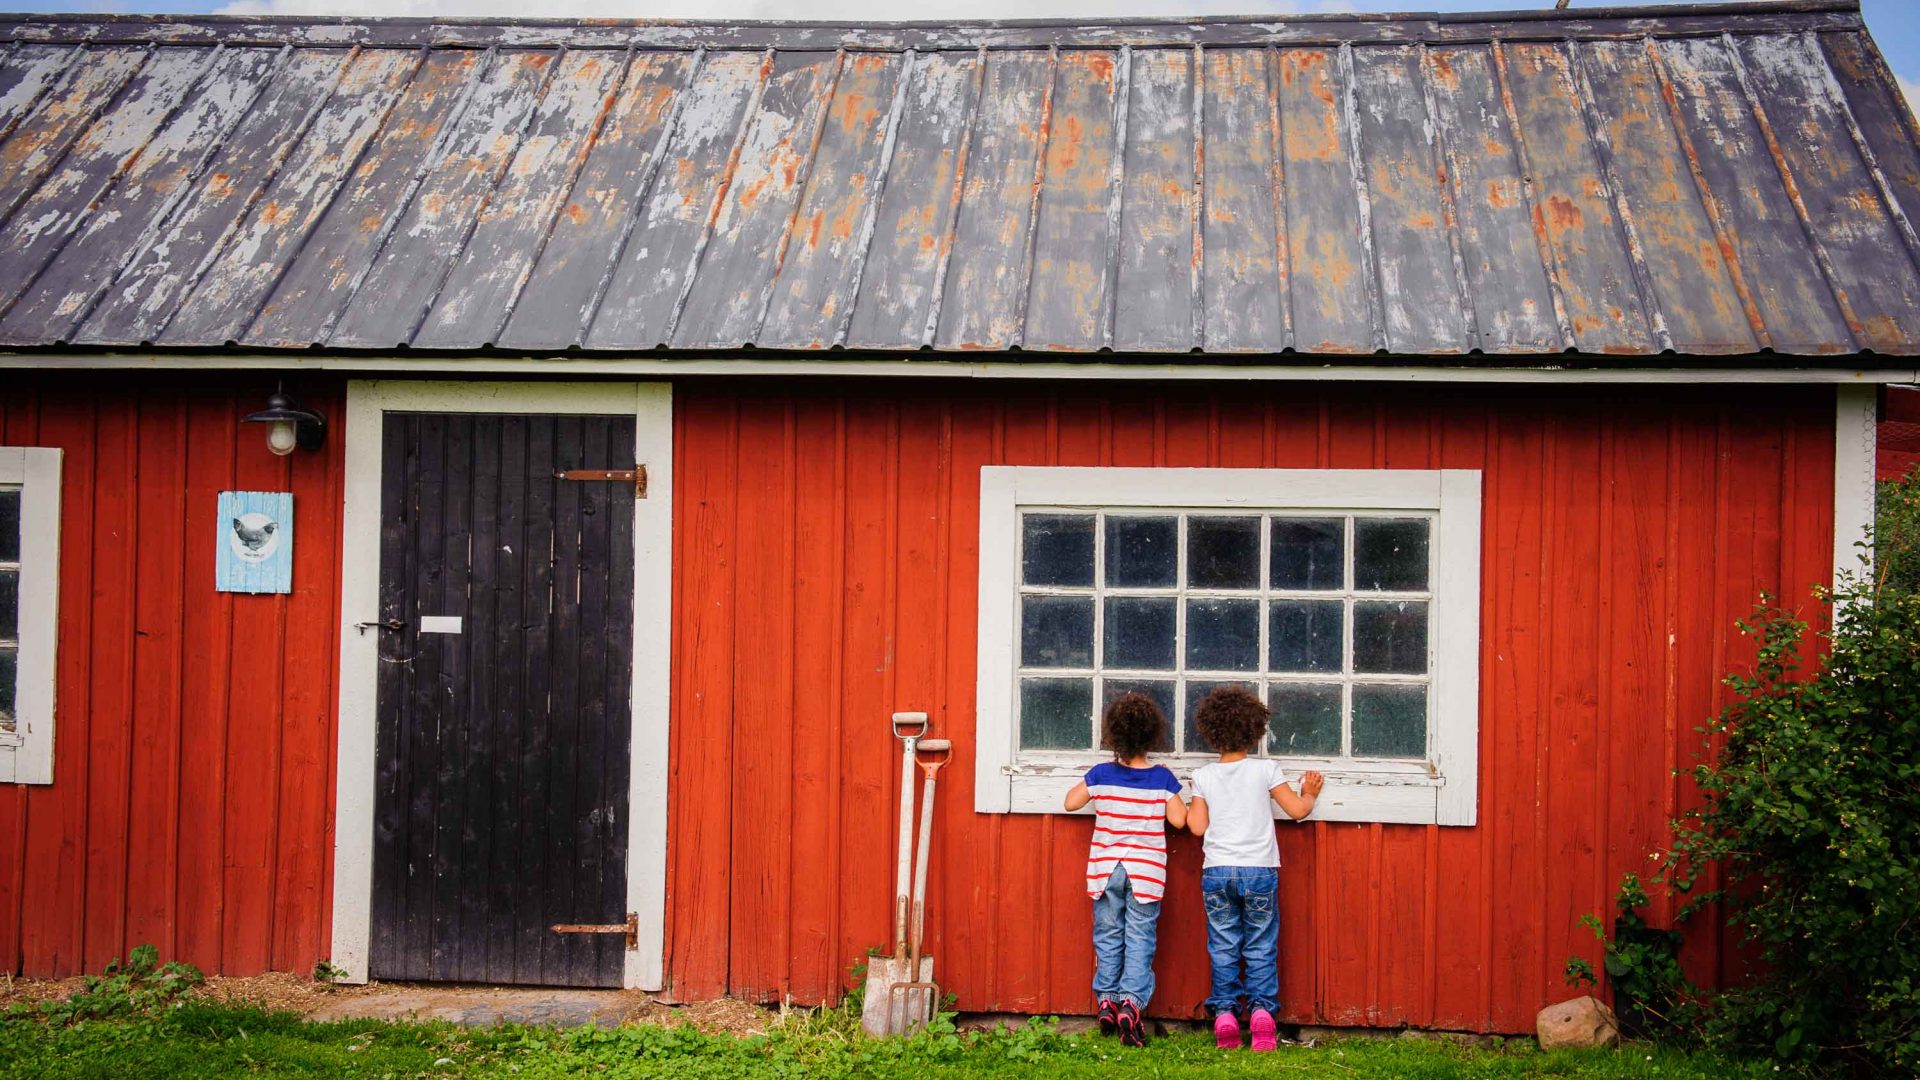 Two children look through the window of a red cottage.